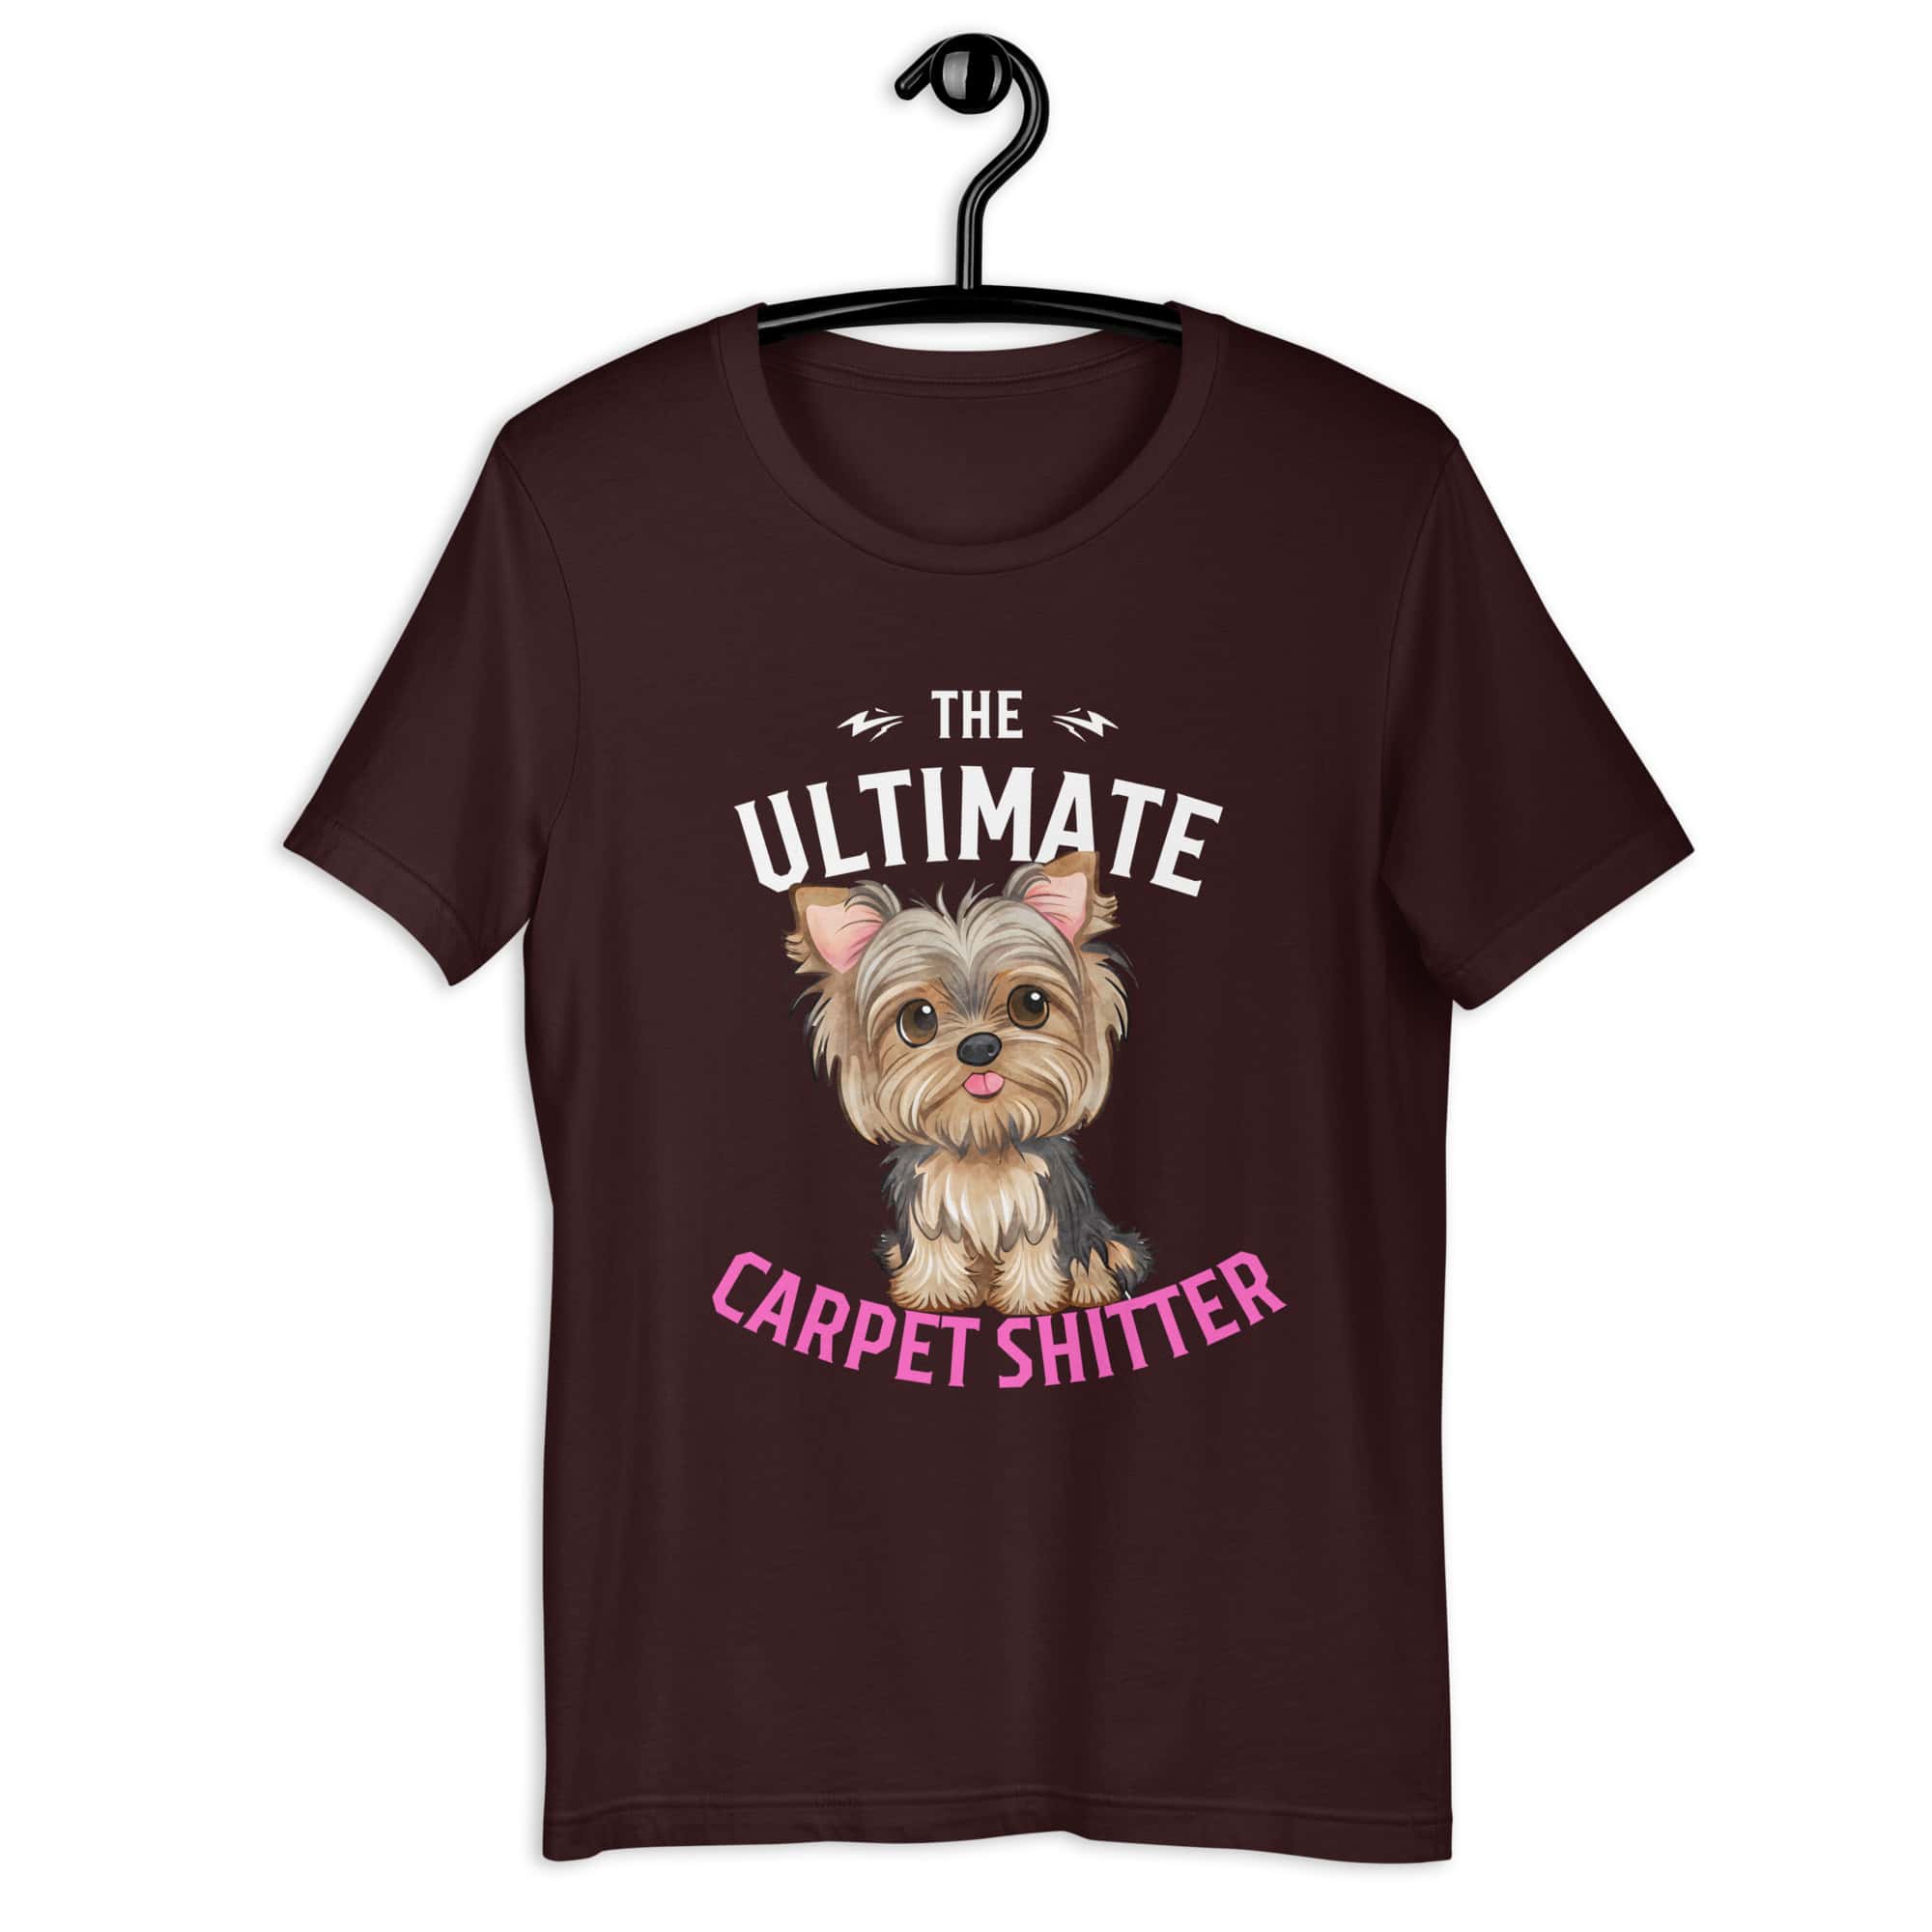 The Ultimate Carpet Shitter Funny Yorkshire Terrier Unisex T-Shirt brown